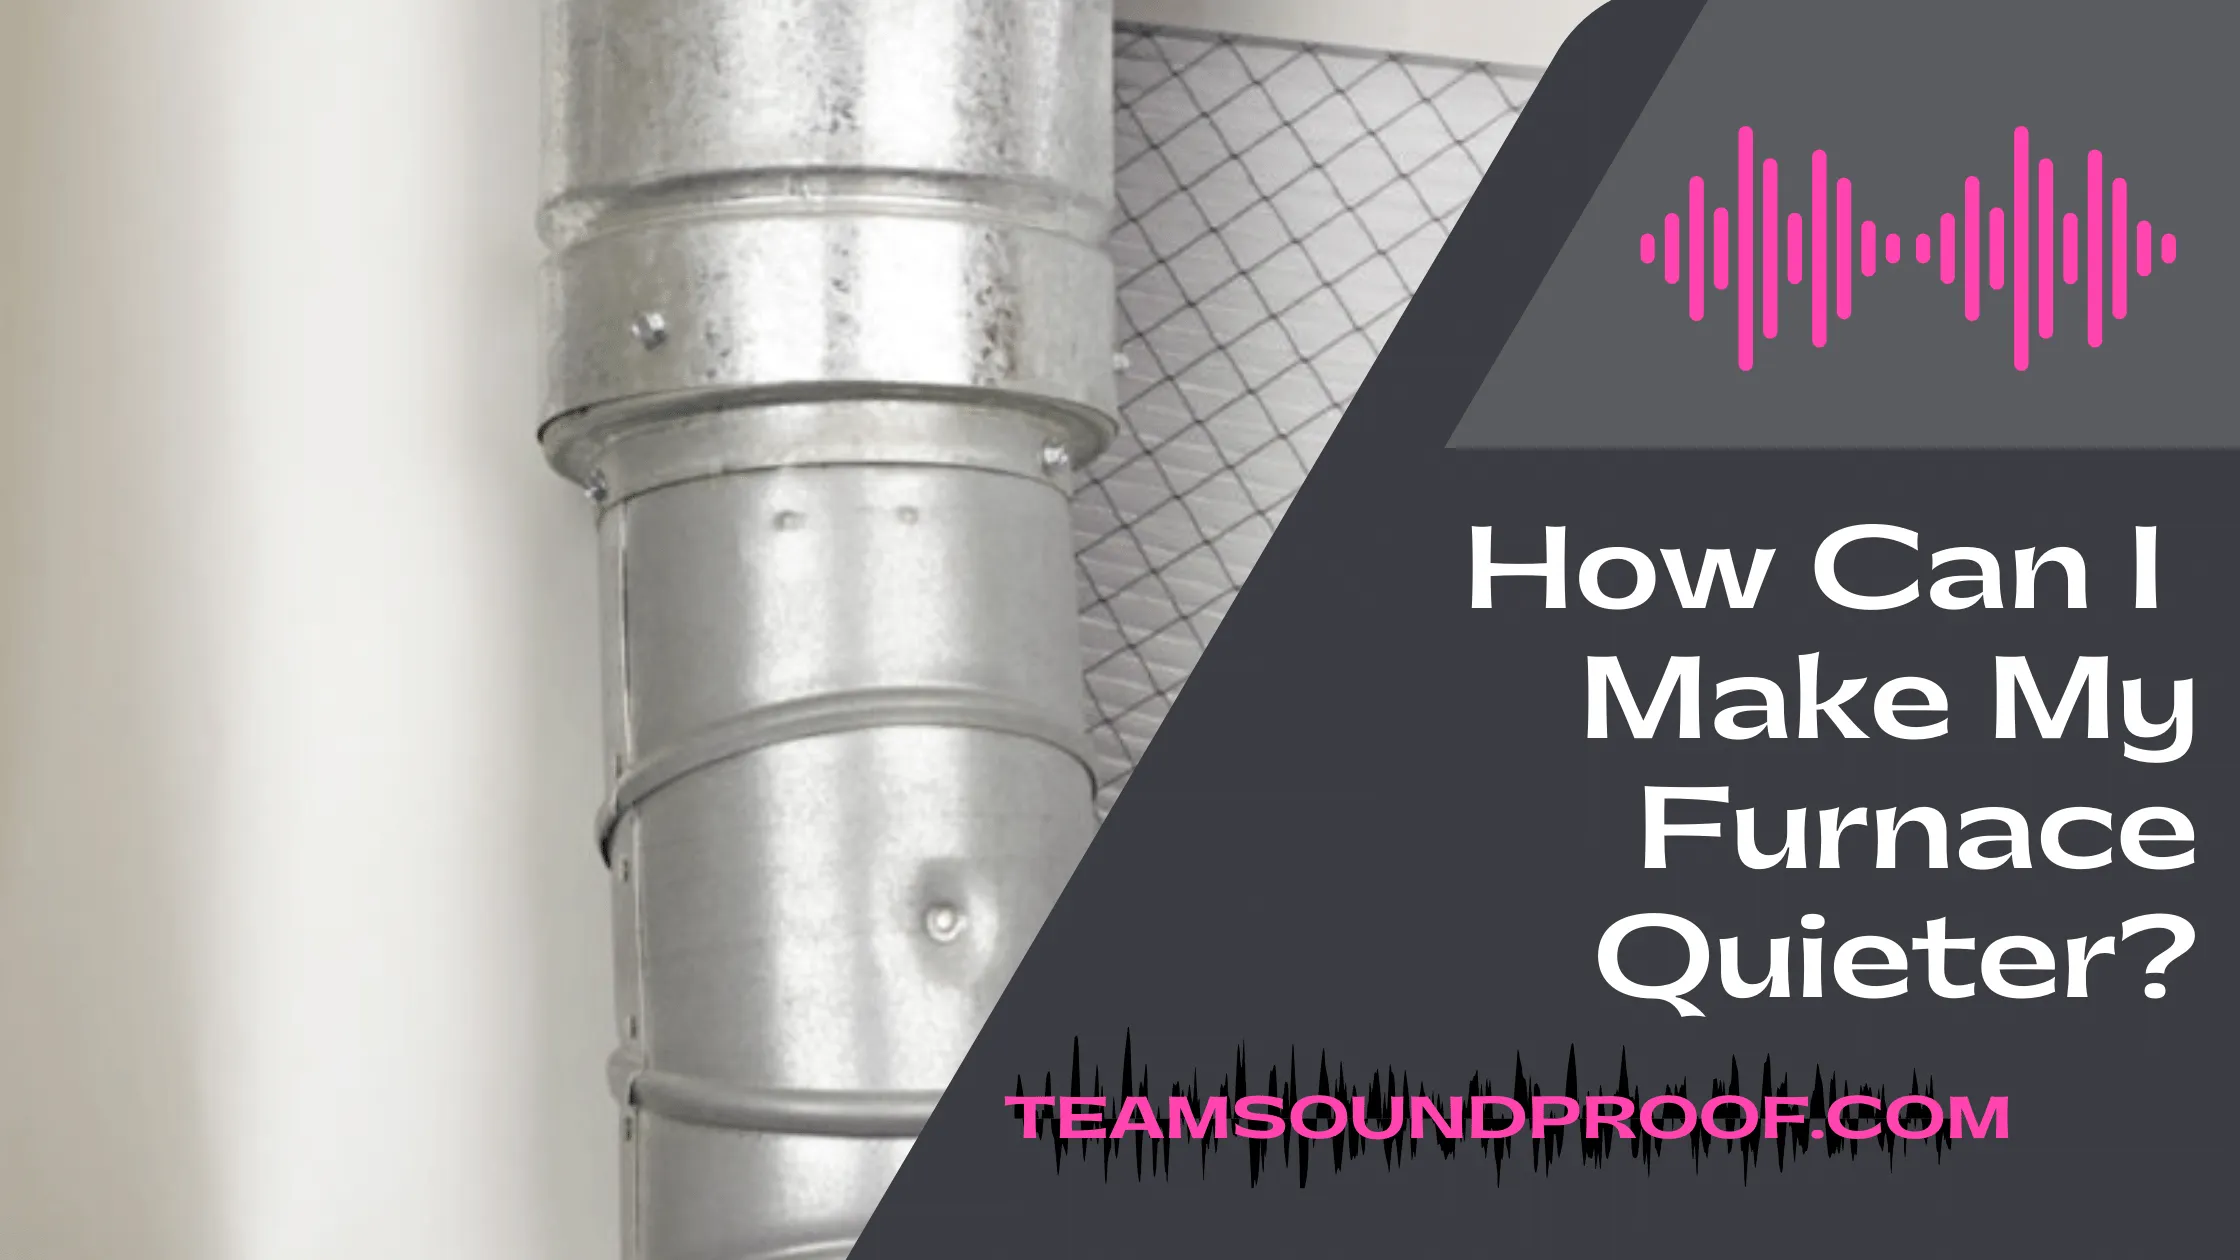 How Can I Make My Furnace Quieter? - Simple Guide